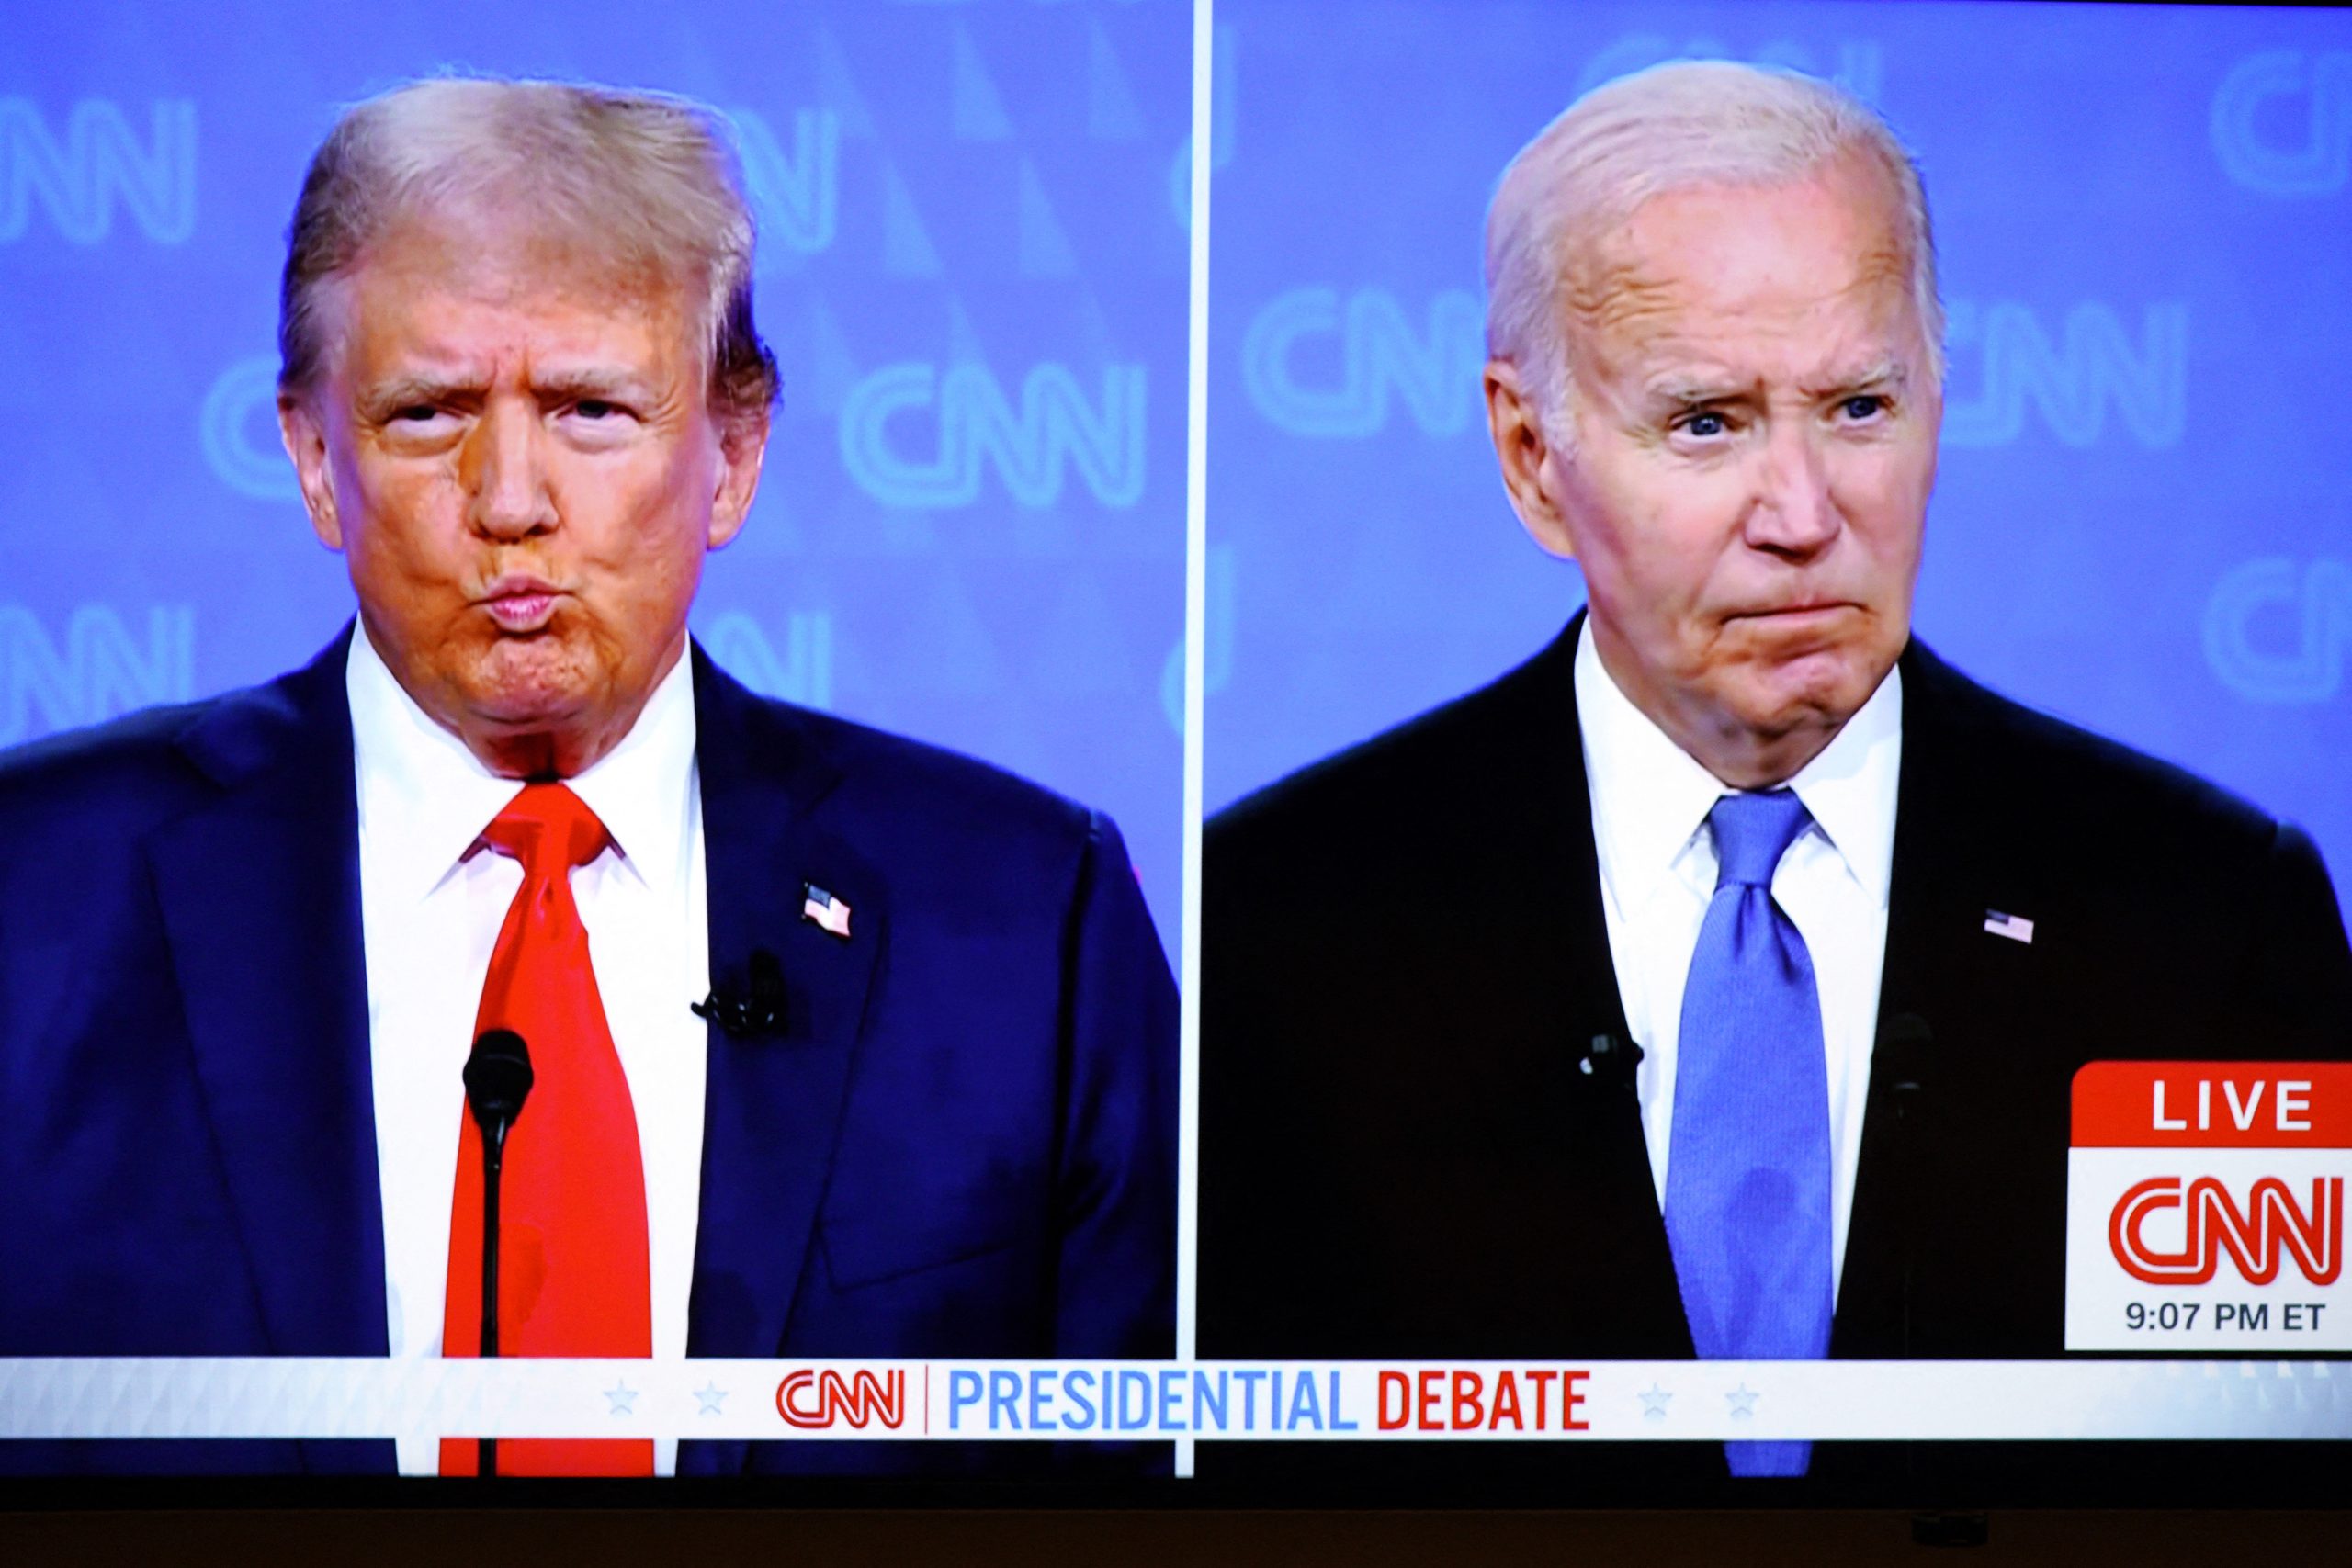 Joe Biden’s terrifying debate performance may finally see him replaced with someone more competent and electable